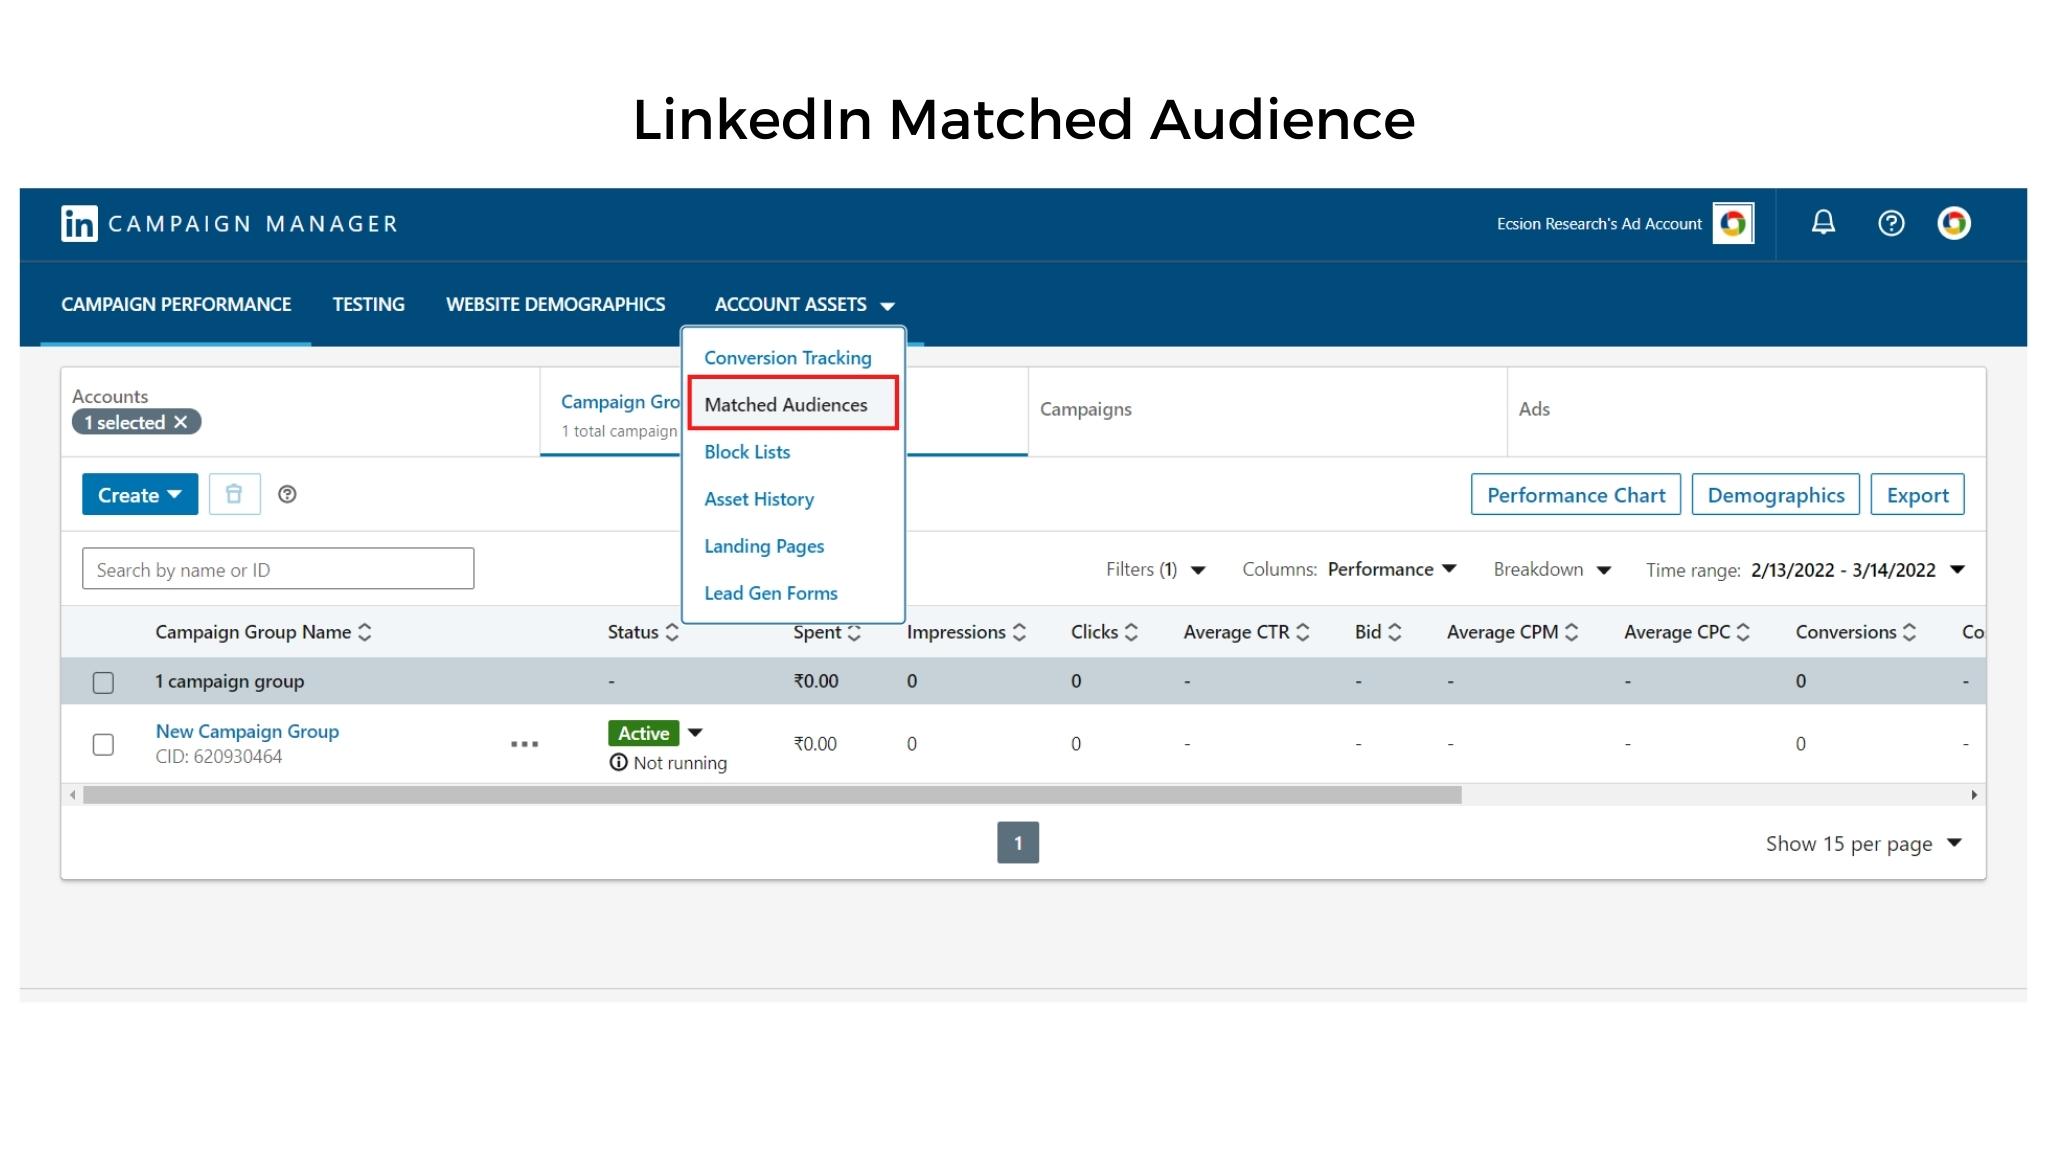 What is LinkedIn Matched Audience?